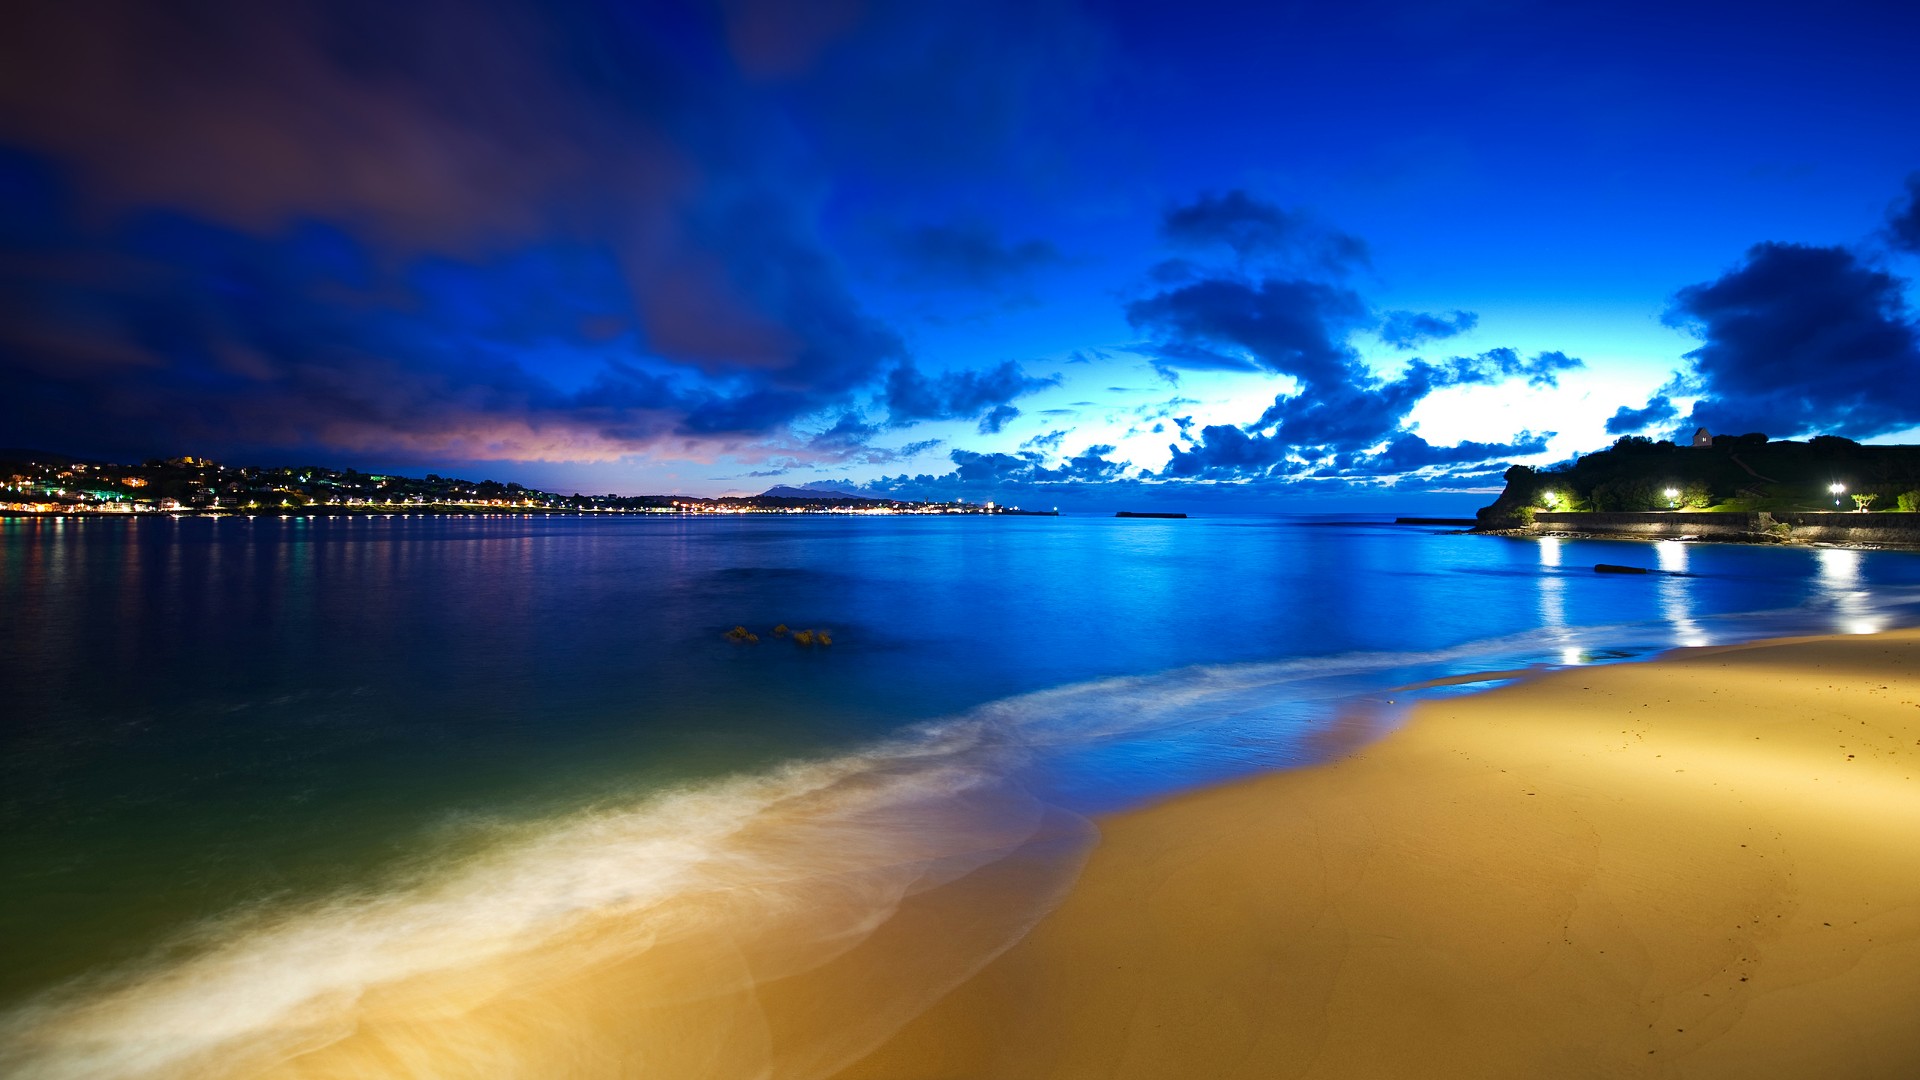 Night sky over the beach wallpaper - backiee